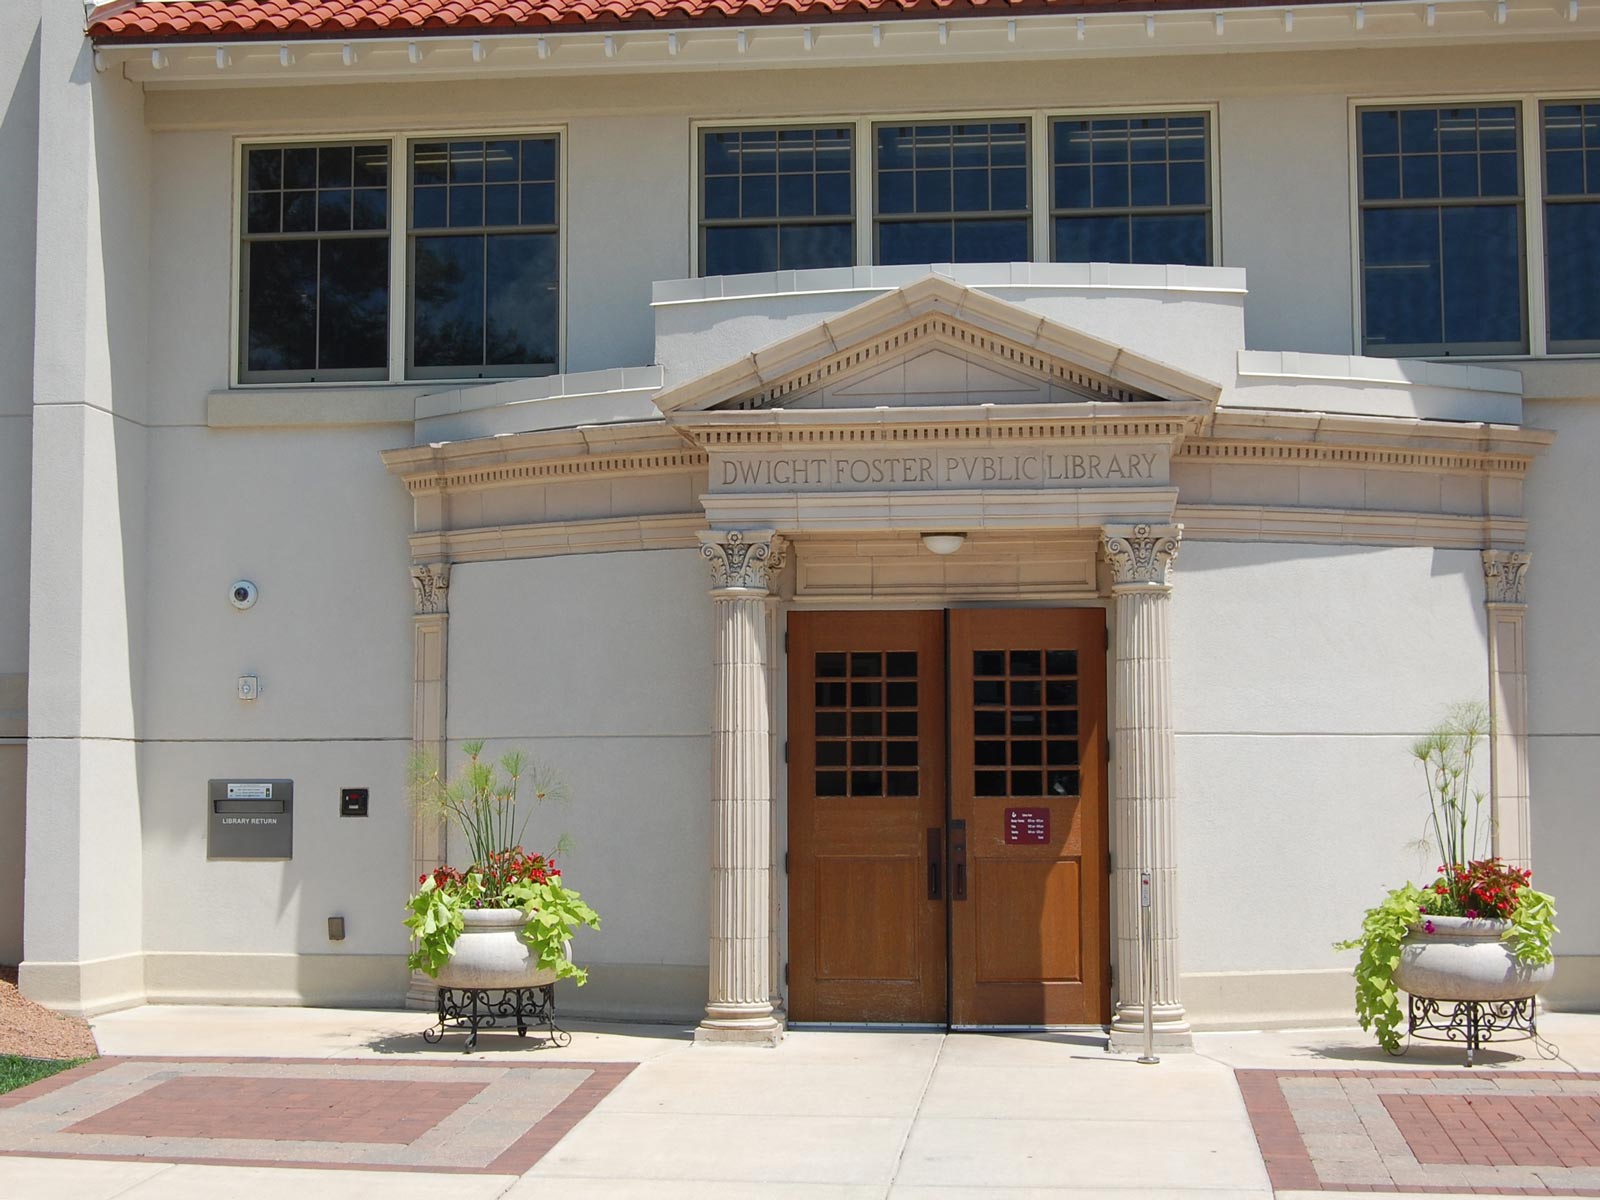 Dwight Foster Public library entrance